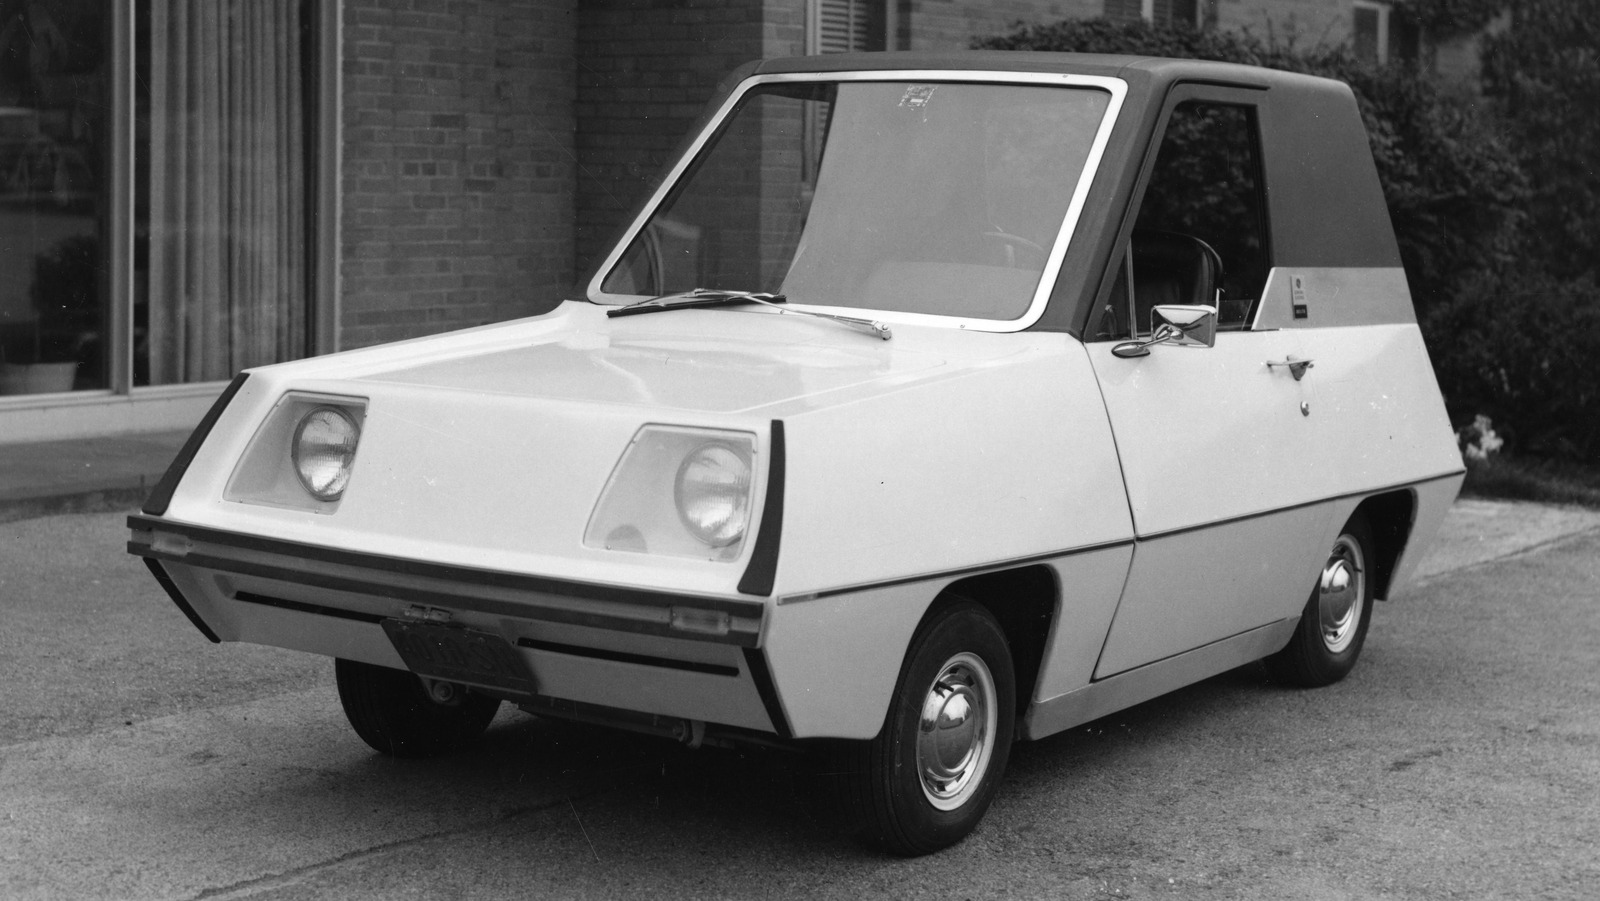 This Early Electric Car Built By GE Proved That EVs Still Had A Long Way To Go – SlashGear